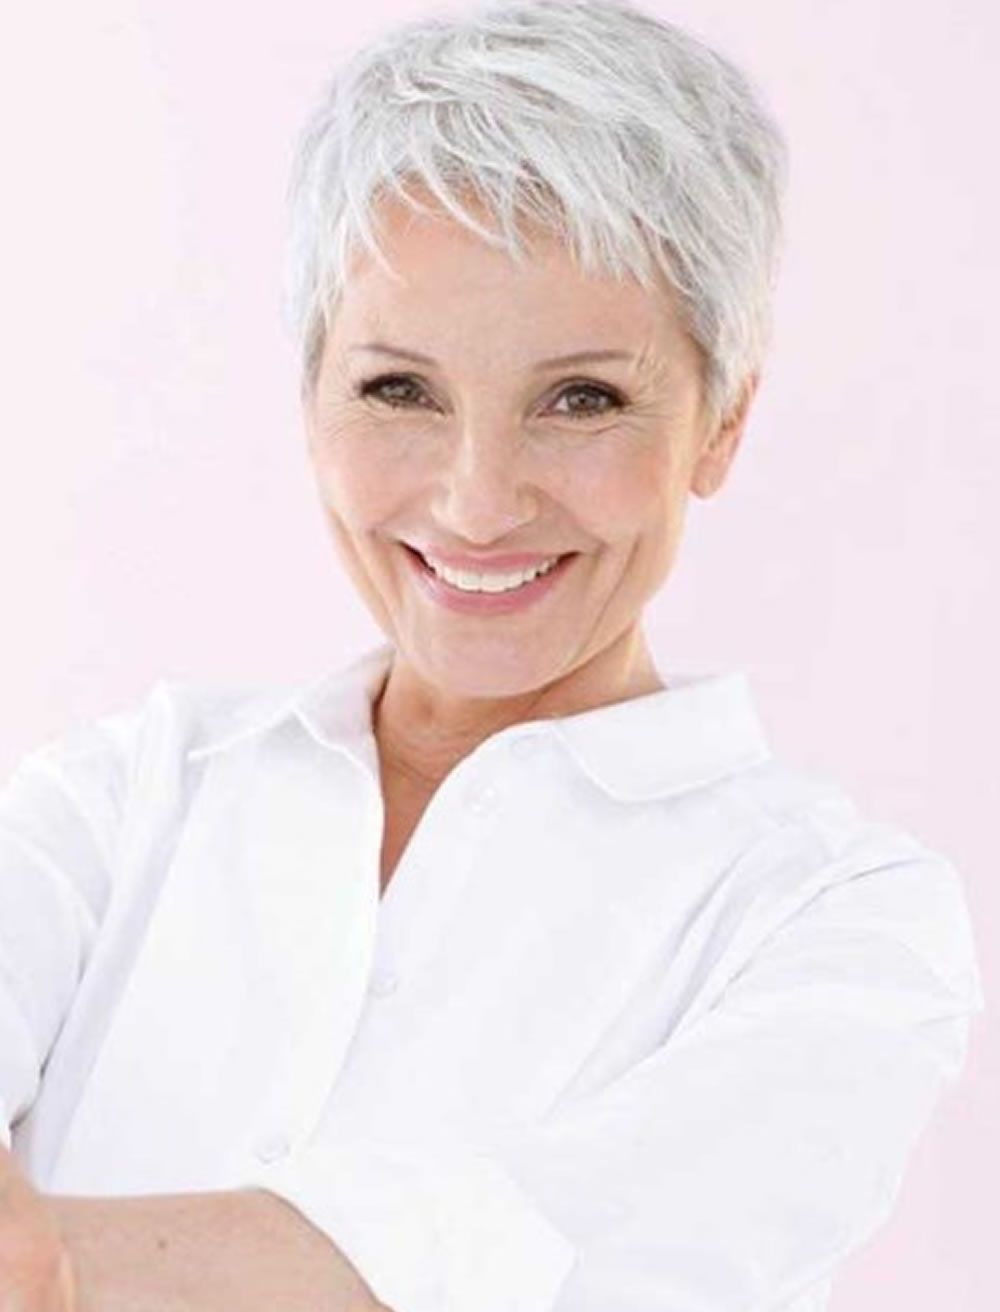 33 Top Pixie Hairstyles For Older Women | Short Pixie Haircuts For For Newest Short Pixie Hairstyles For Older Women (View 2 of 15)